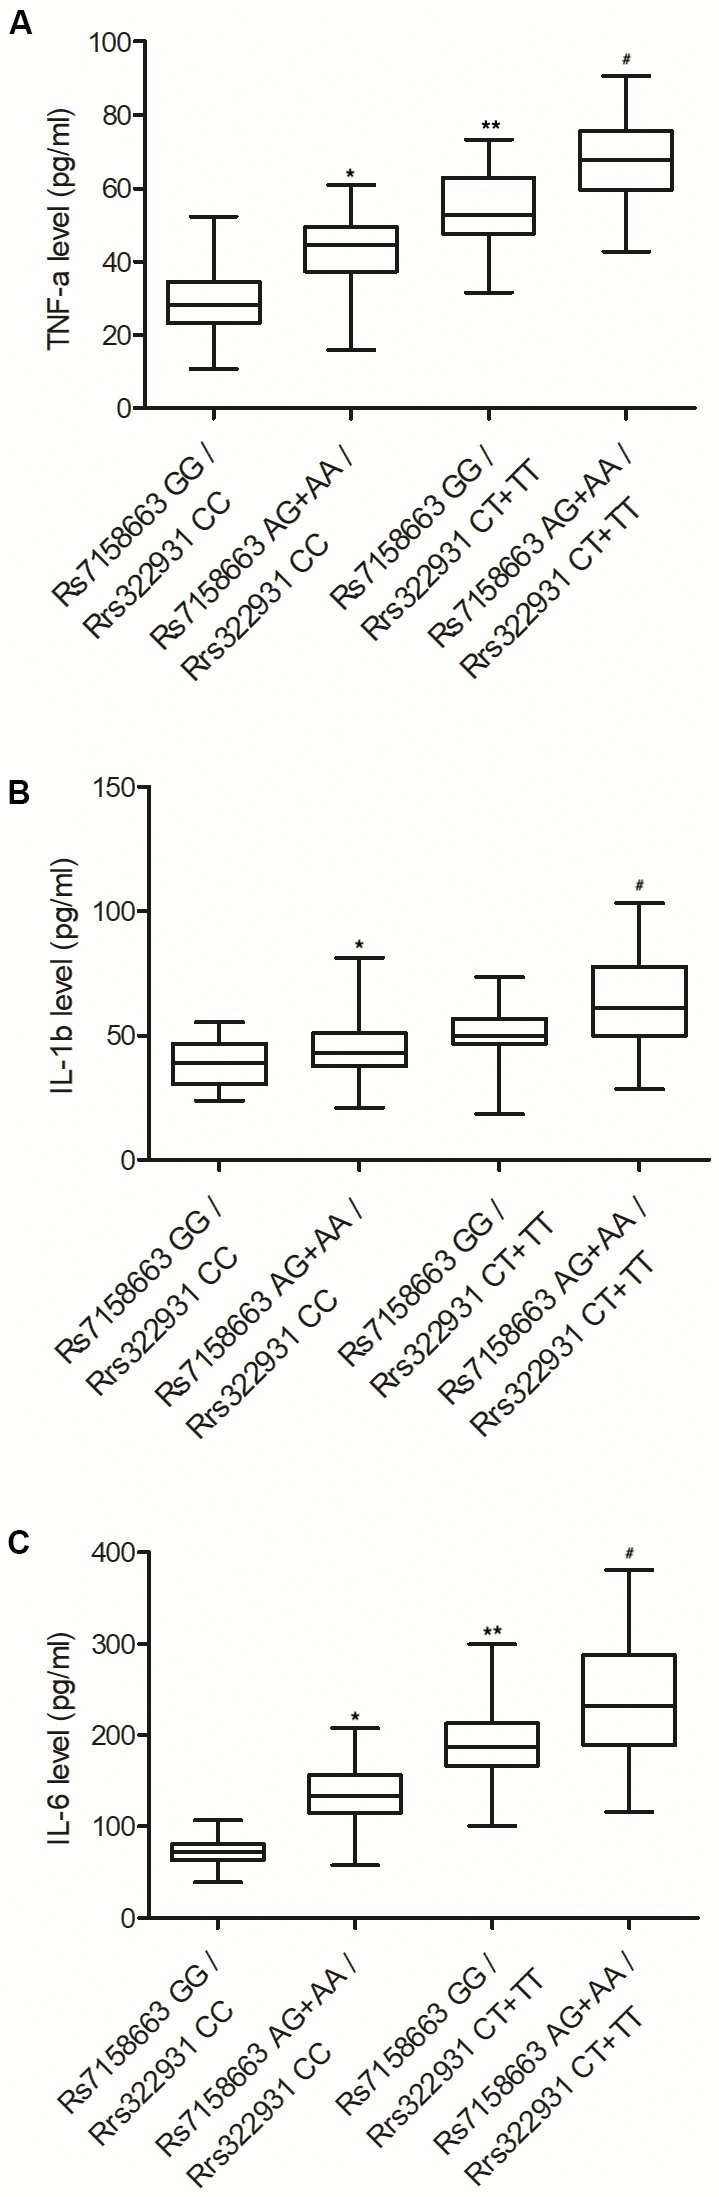 The expressions of TNF-α (A), IL-1β (B) and IL-6 (C) were all progressively elevated in the peripheral blood of Crohn’s disease patients carrying rs7158663 GG/rs322931 CC (N=76), rs7158663 AG+AA/rs322931 CC (N=62), rs7158663 GG/rs322931 CT+TT (N=36), and rs7158663 AG+AA/rs322931 CT+TT (N=32) genotypes (* P value 